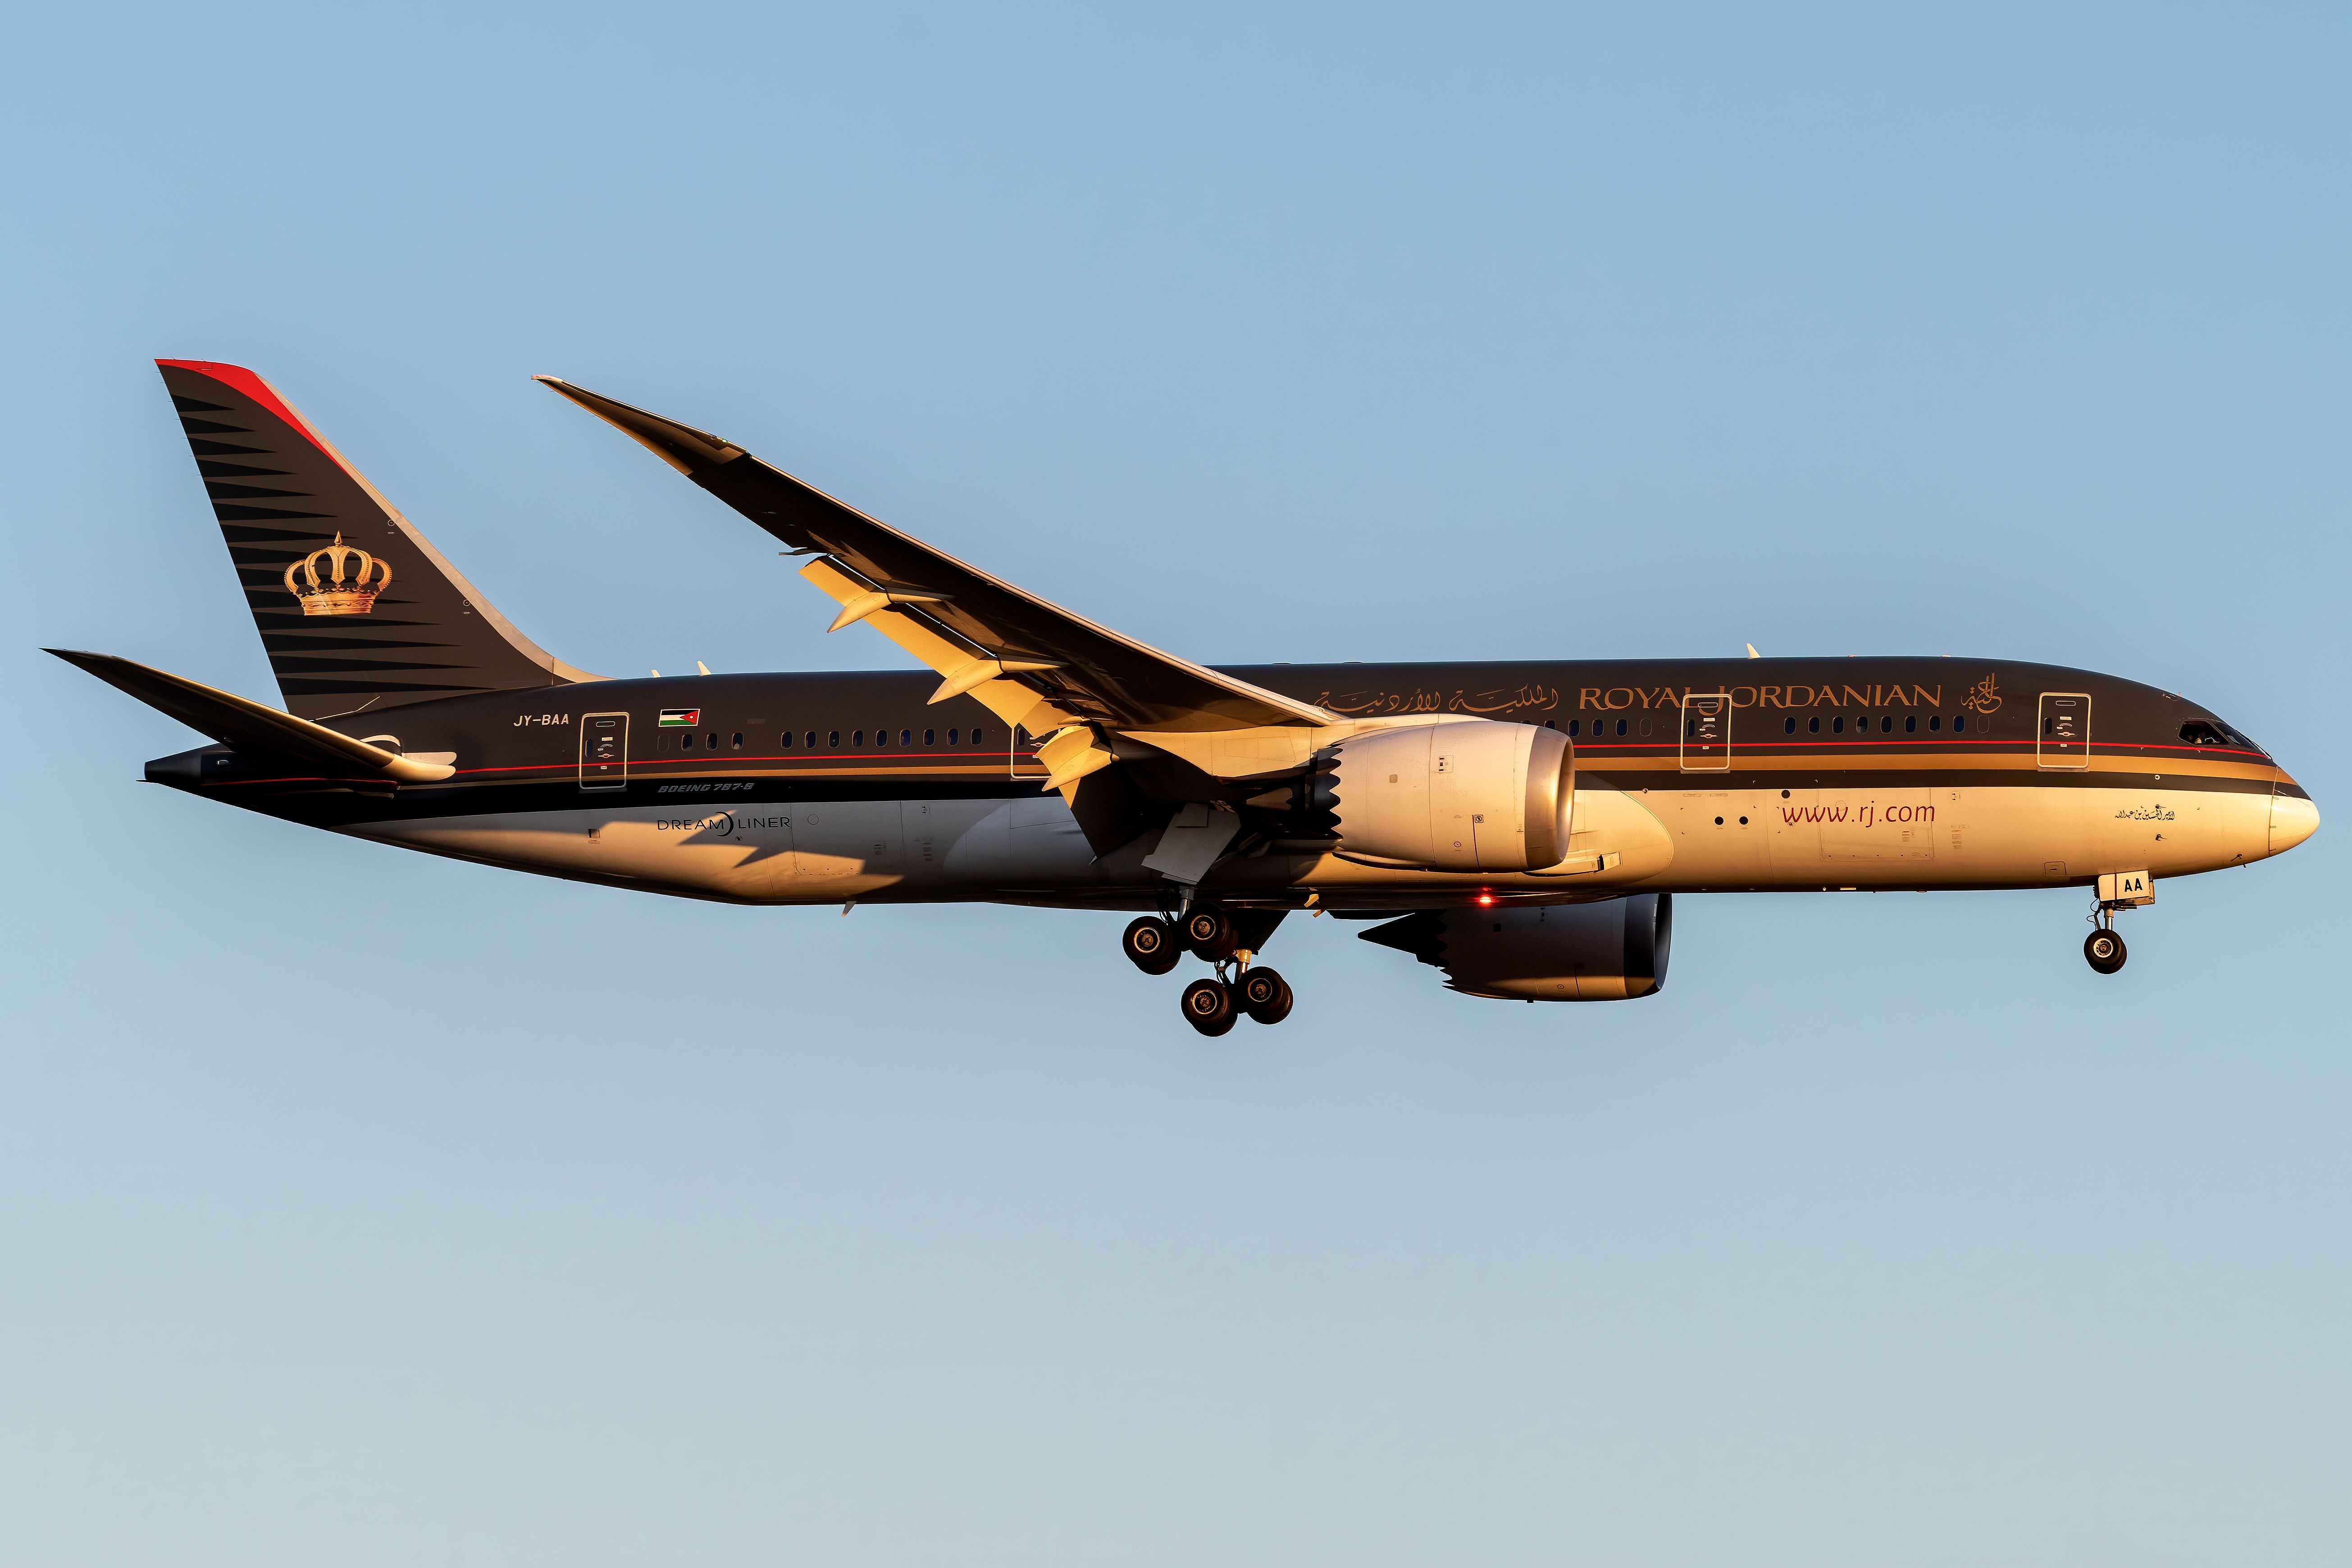 A Royal Jordanian Boeing 787 Flying in the sky.